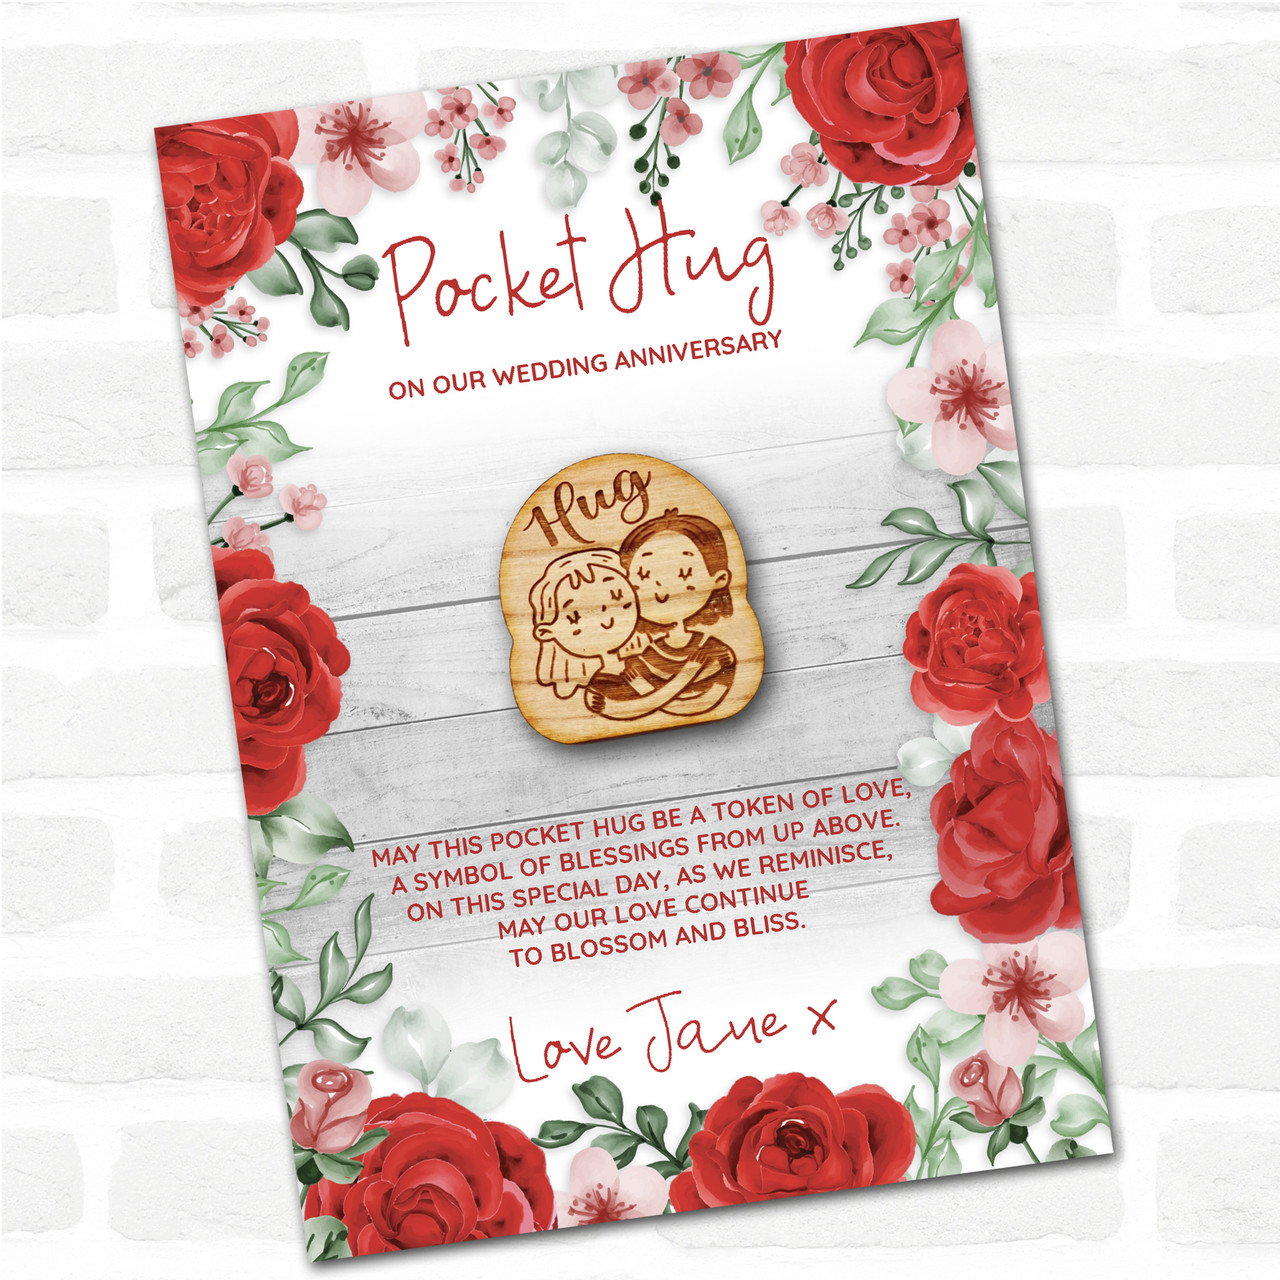 Pocket Hug Gift Card, For the one you Love and Family & Friend.